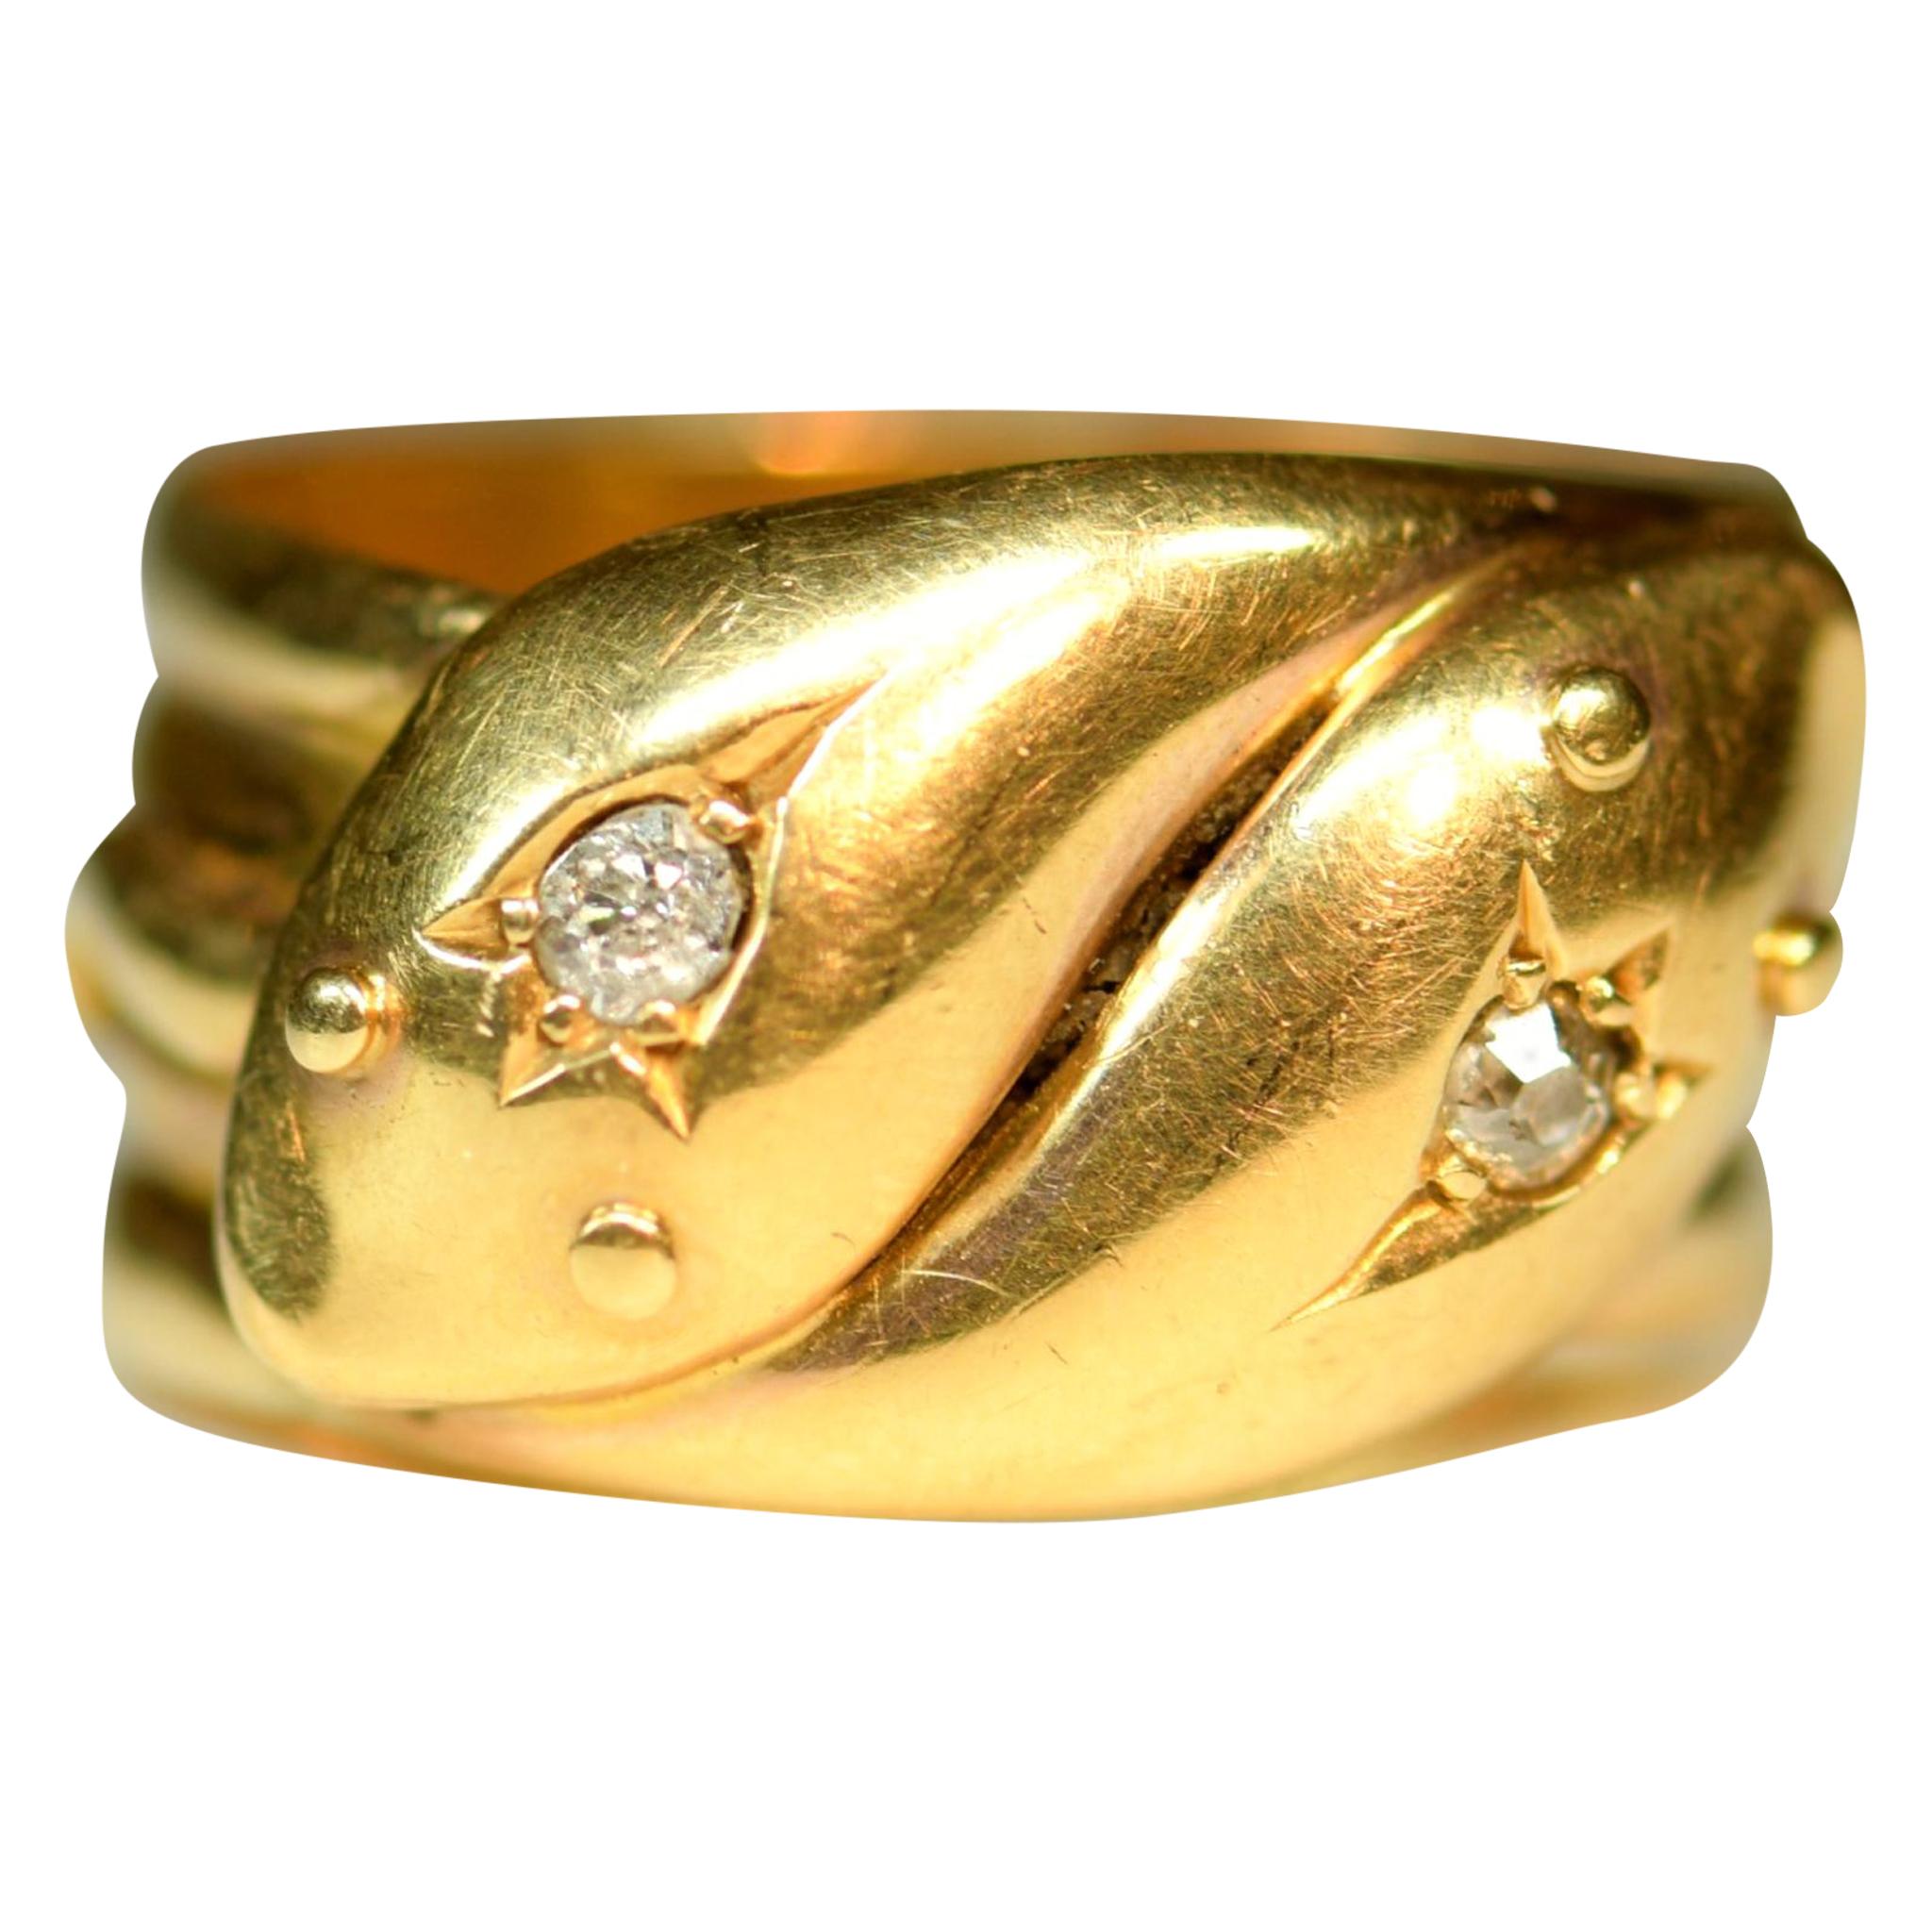 Victorian 18 Karat Gold Entwined Double Snake Ring with Diamond Set Eyes